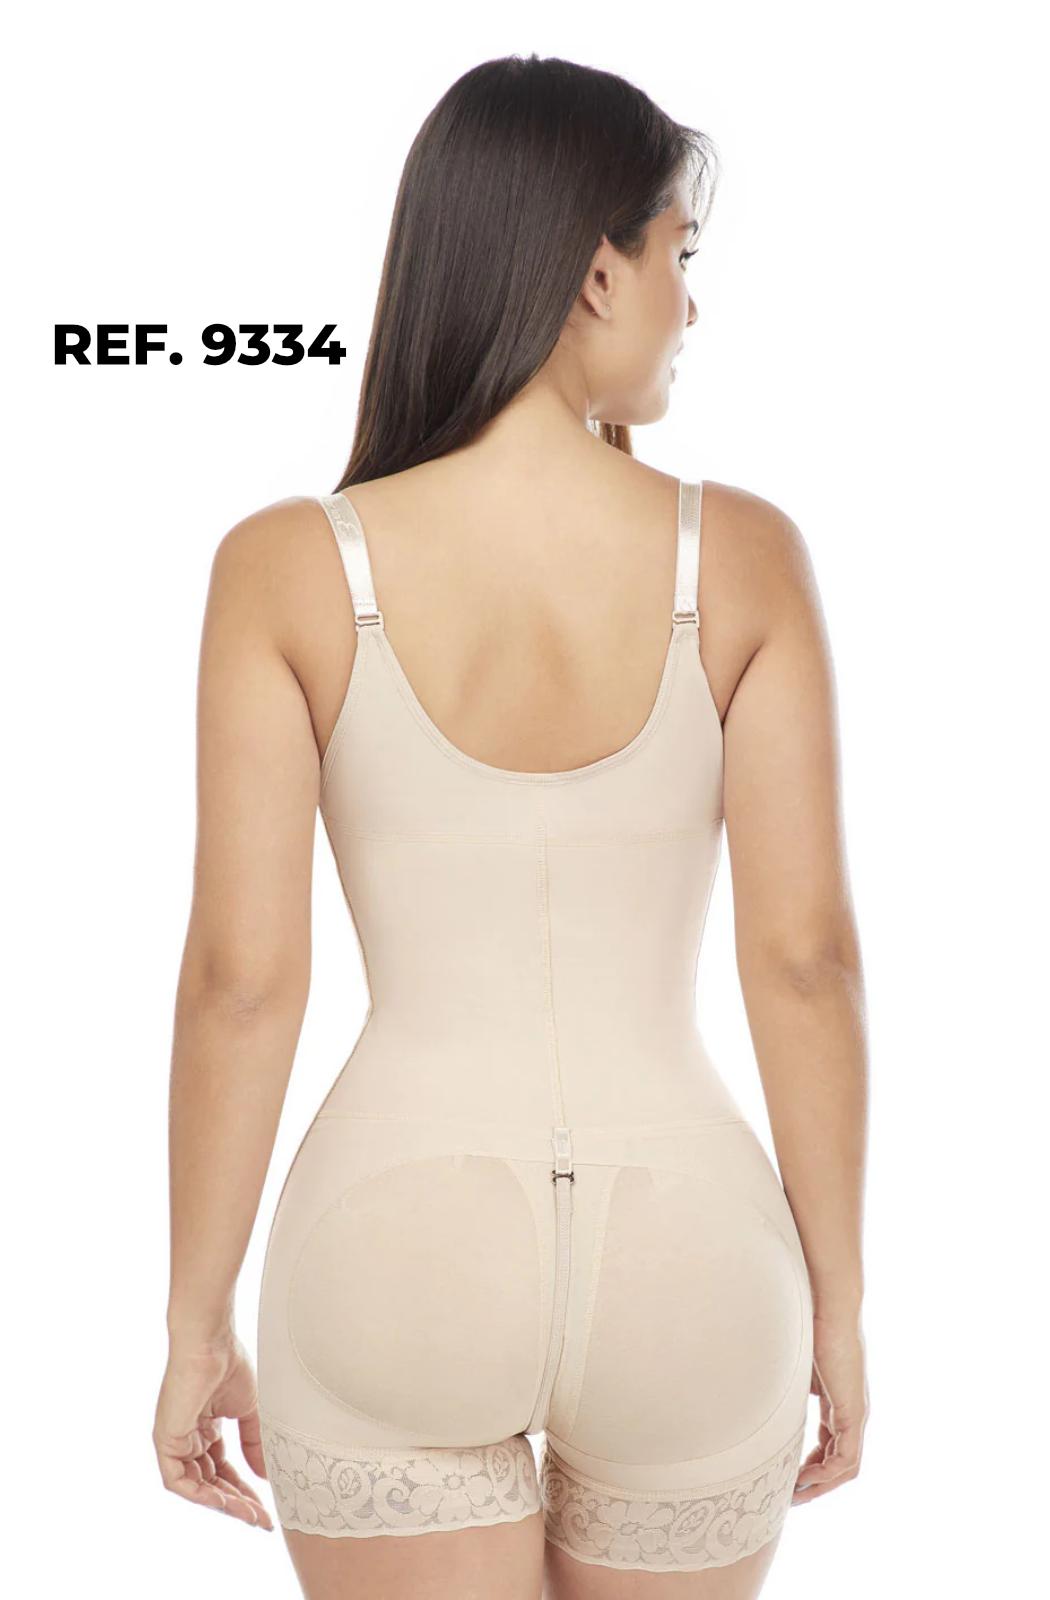 Short Girdle for Daily Use and/or Postpartum